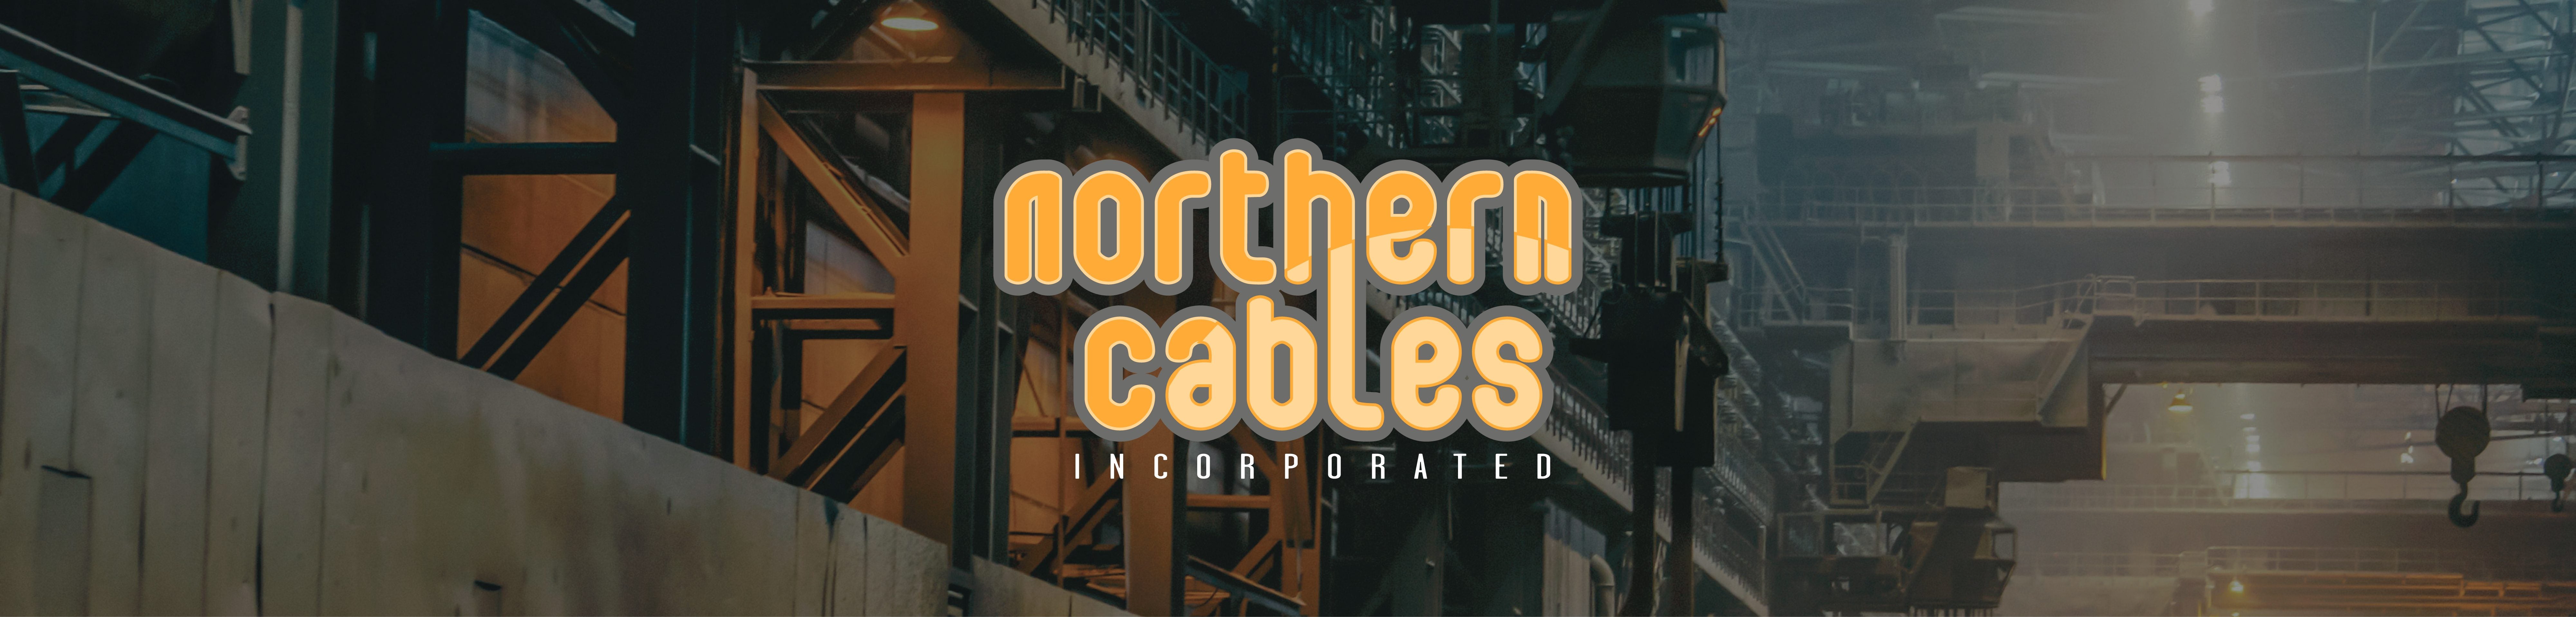 Texcan - Landing Pages - Northern Cables Cover Image.jpg